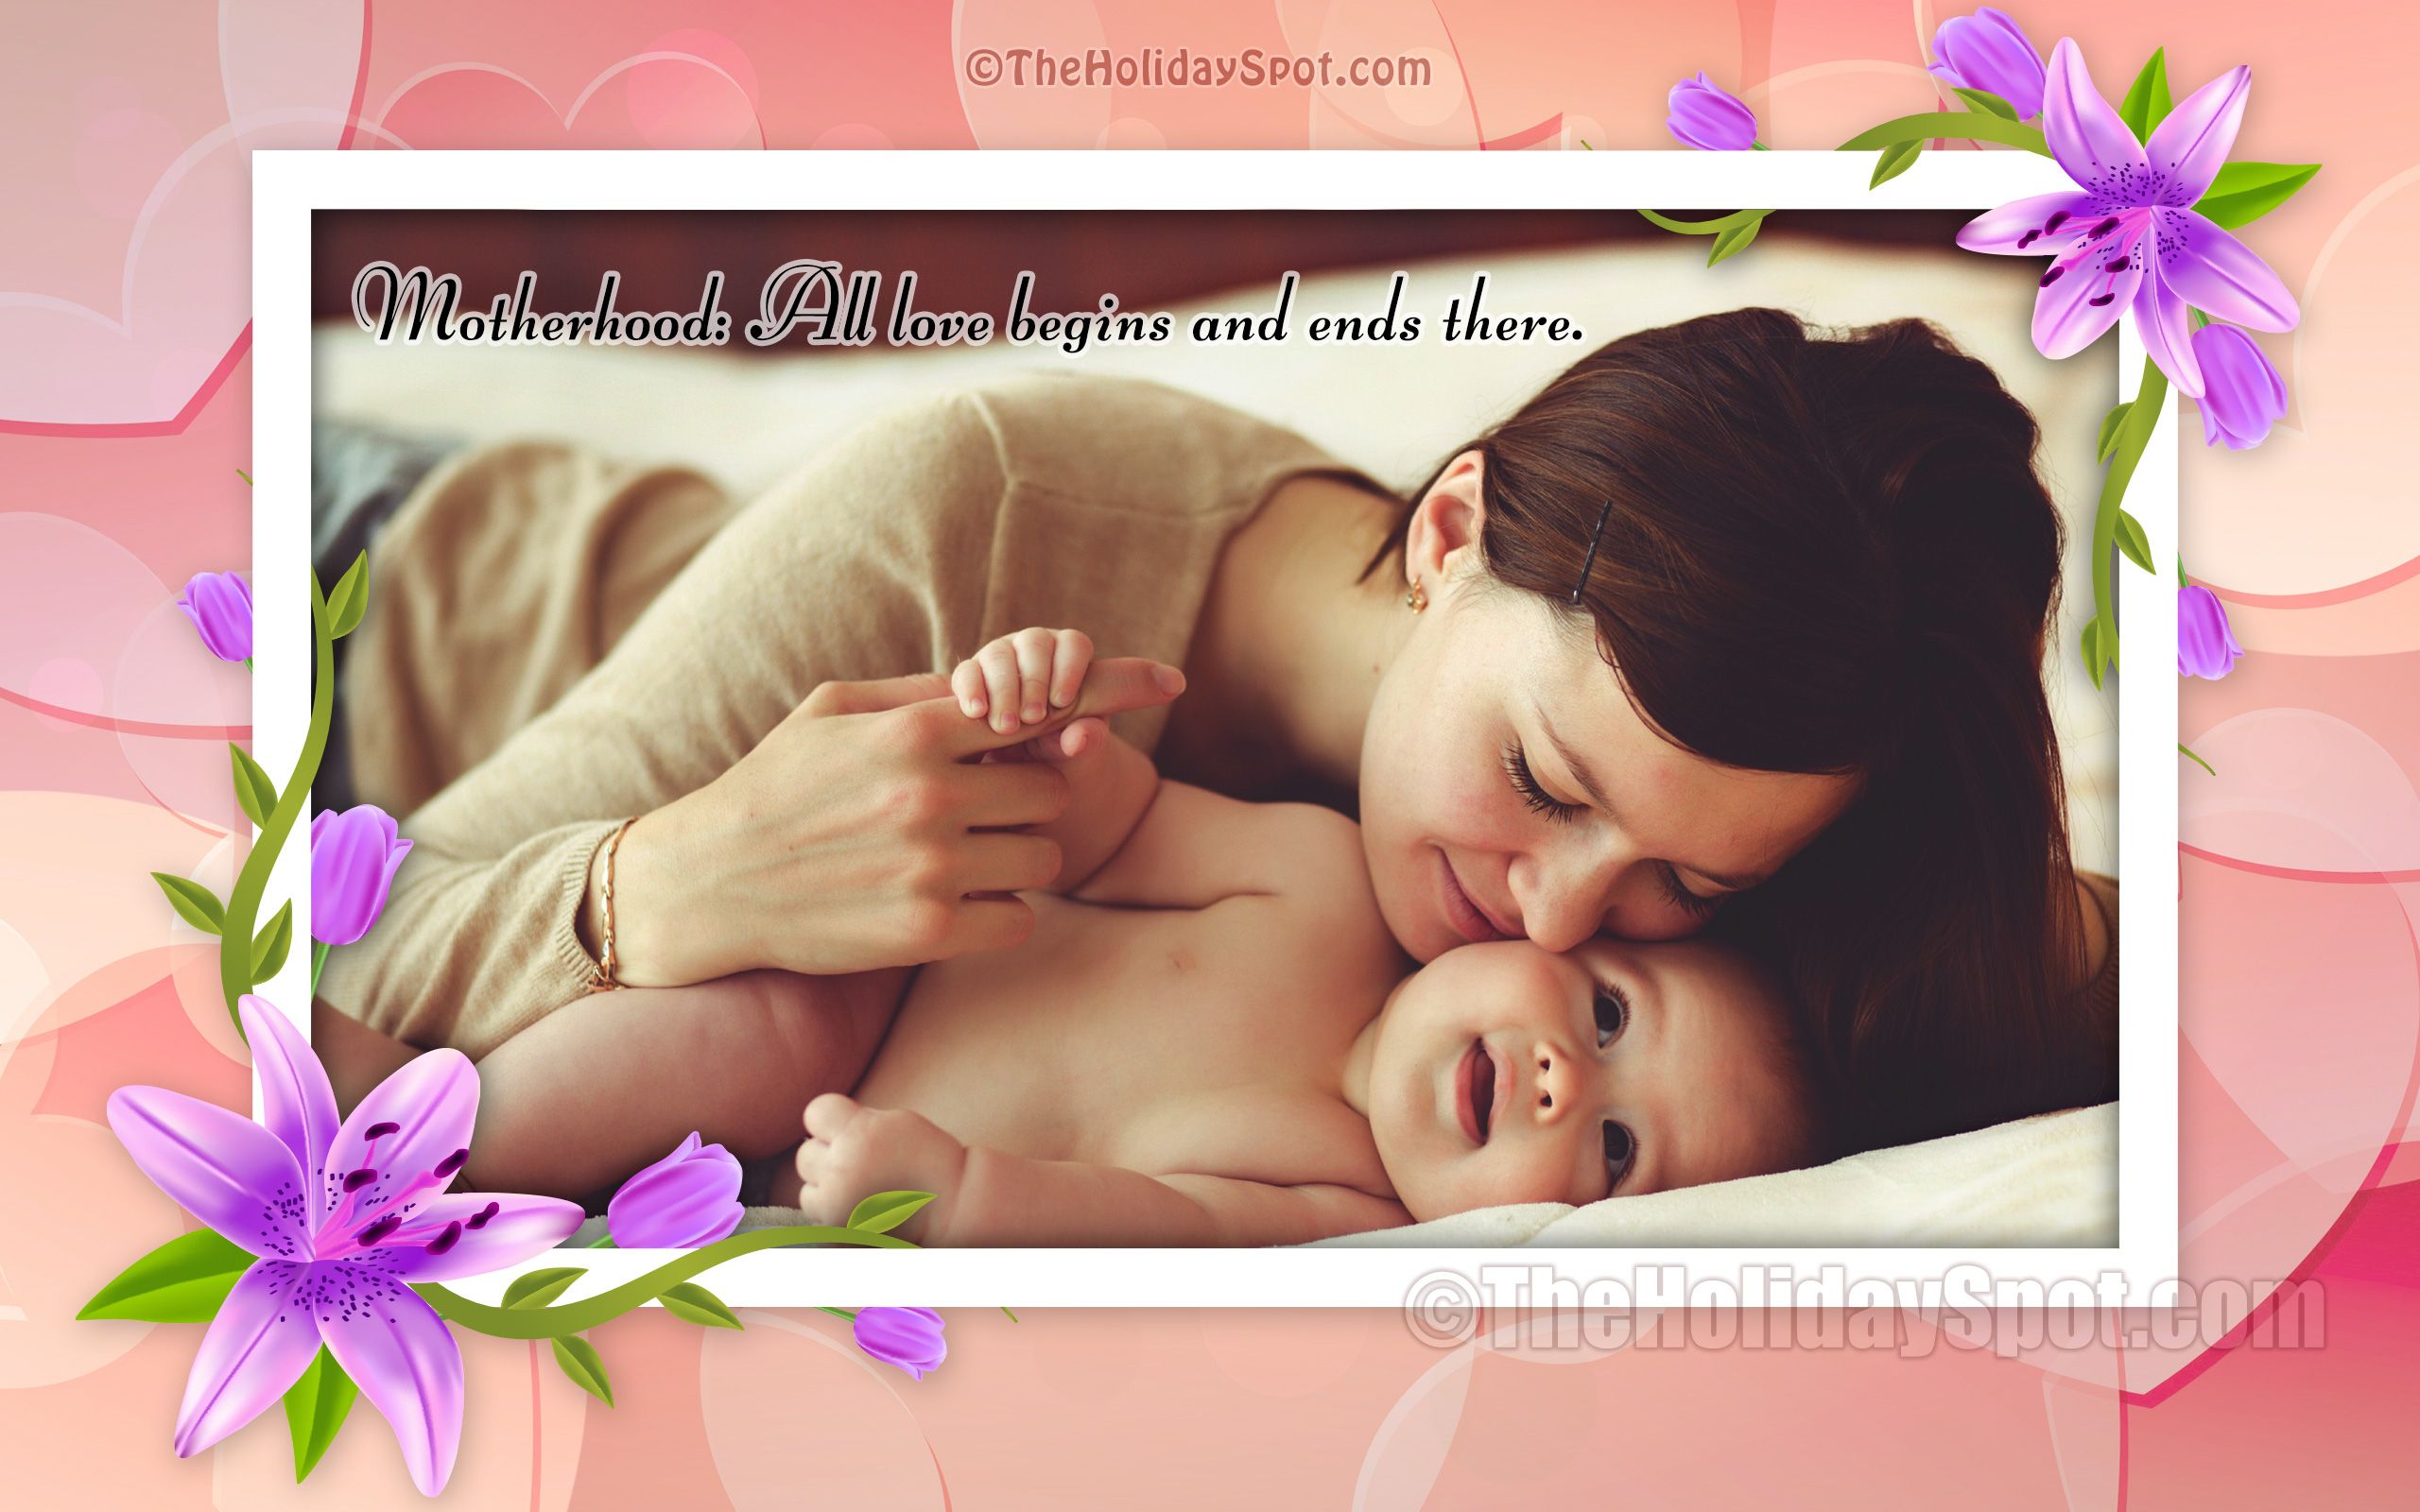 Free Mothers Day HD wallpaper Download .theholidayspot.com